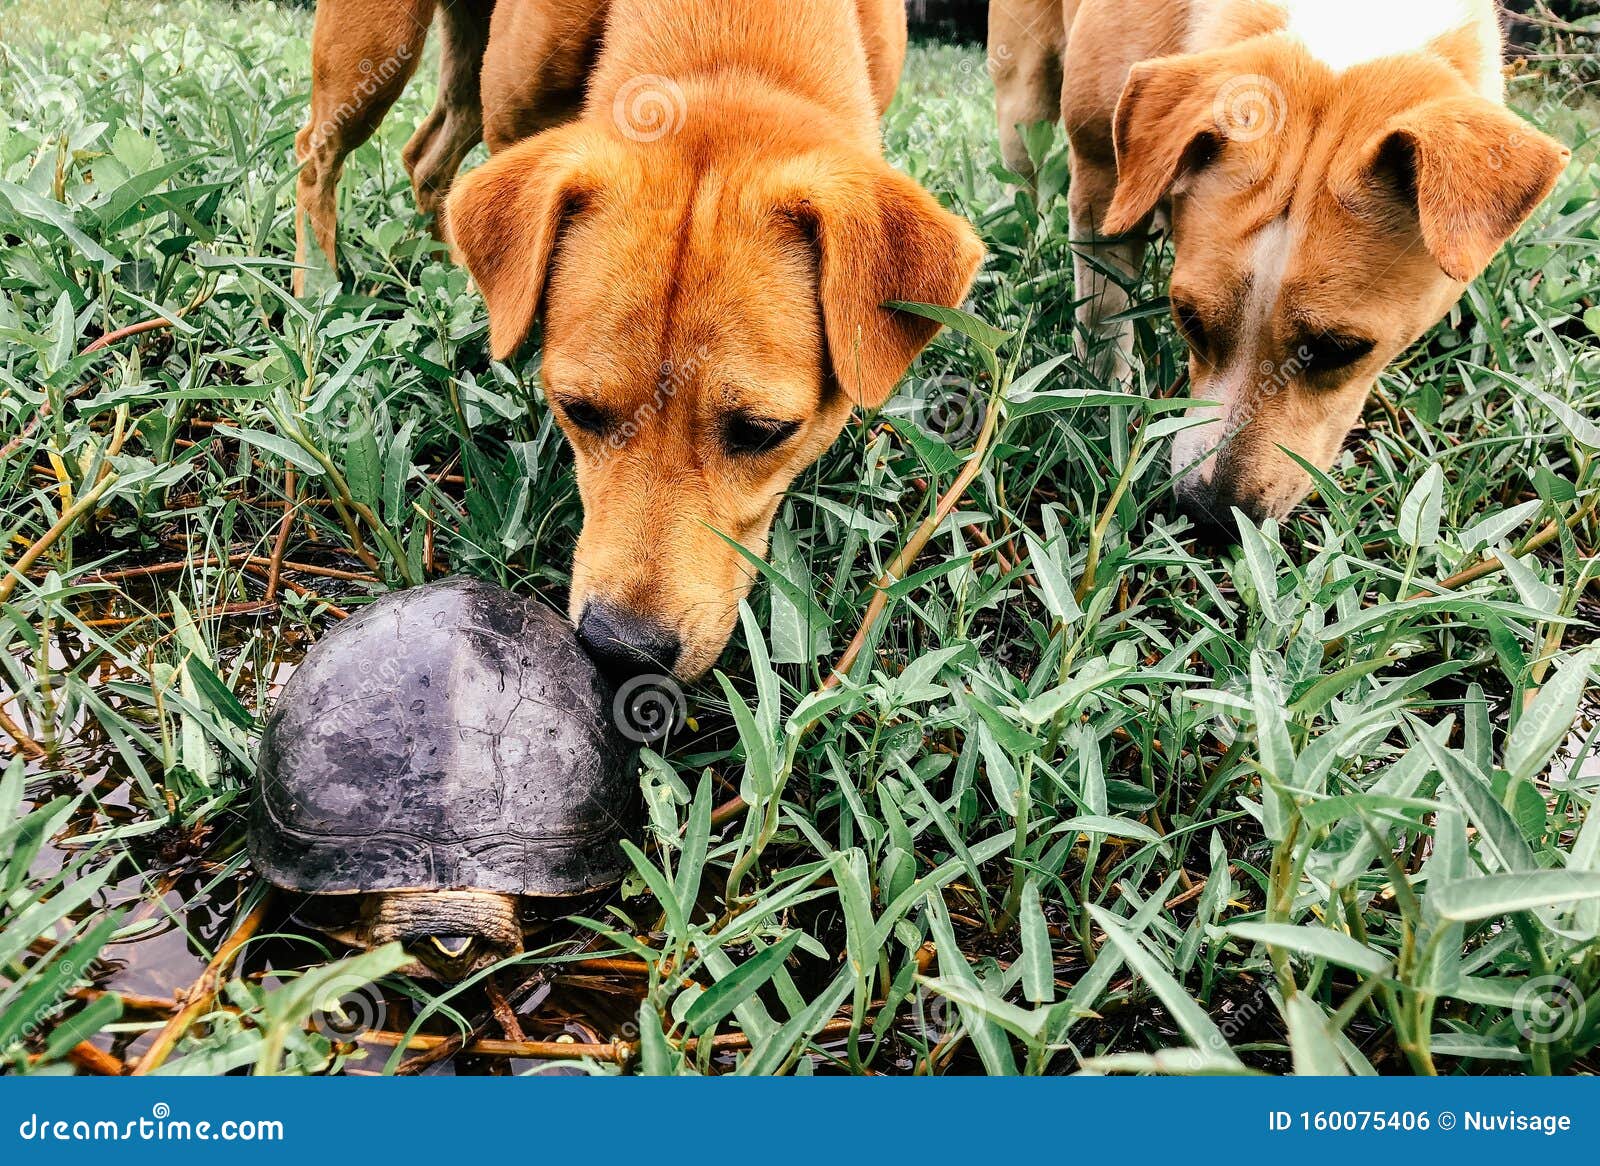 dogs curiously sniffing turtle in nature green garden